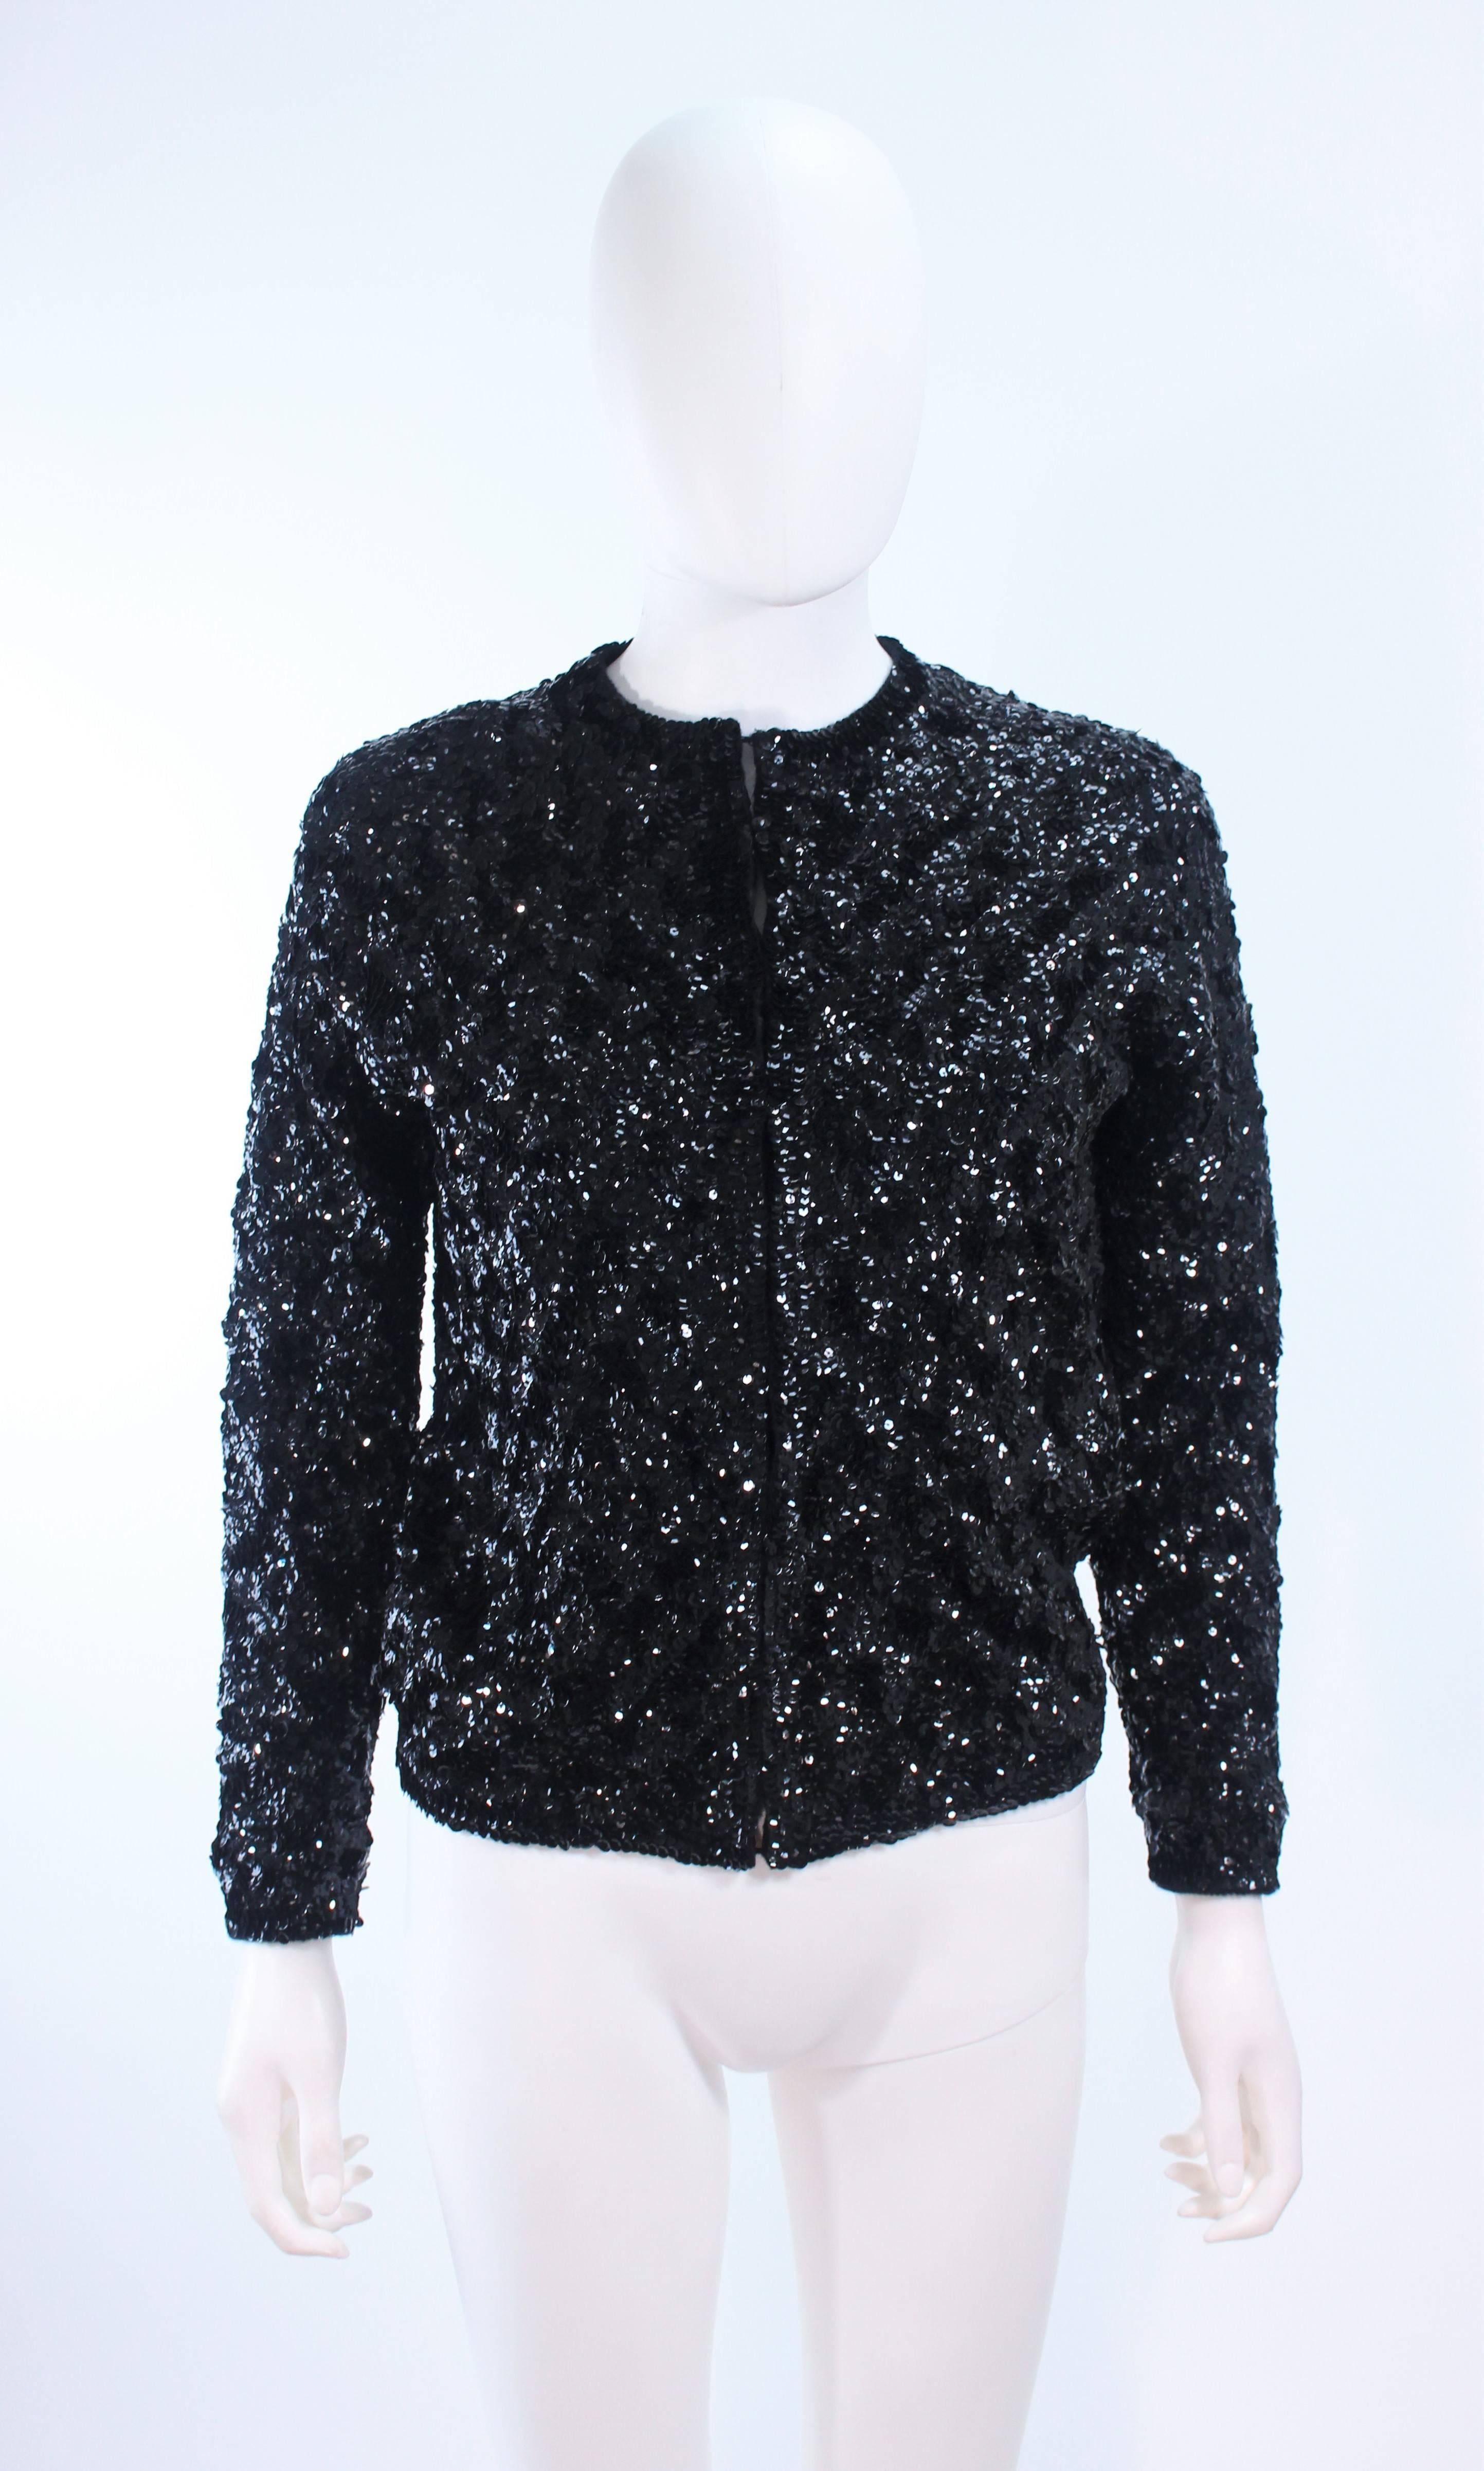 This sequin cardigan is composed of a sequin wool. There are center front hook and eye closures. In excellent vintage condition.

**Please cross-reference measurements for personal accuracy. Size in description box is an estimation.

Measures